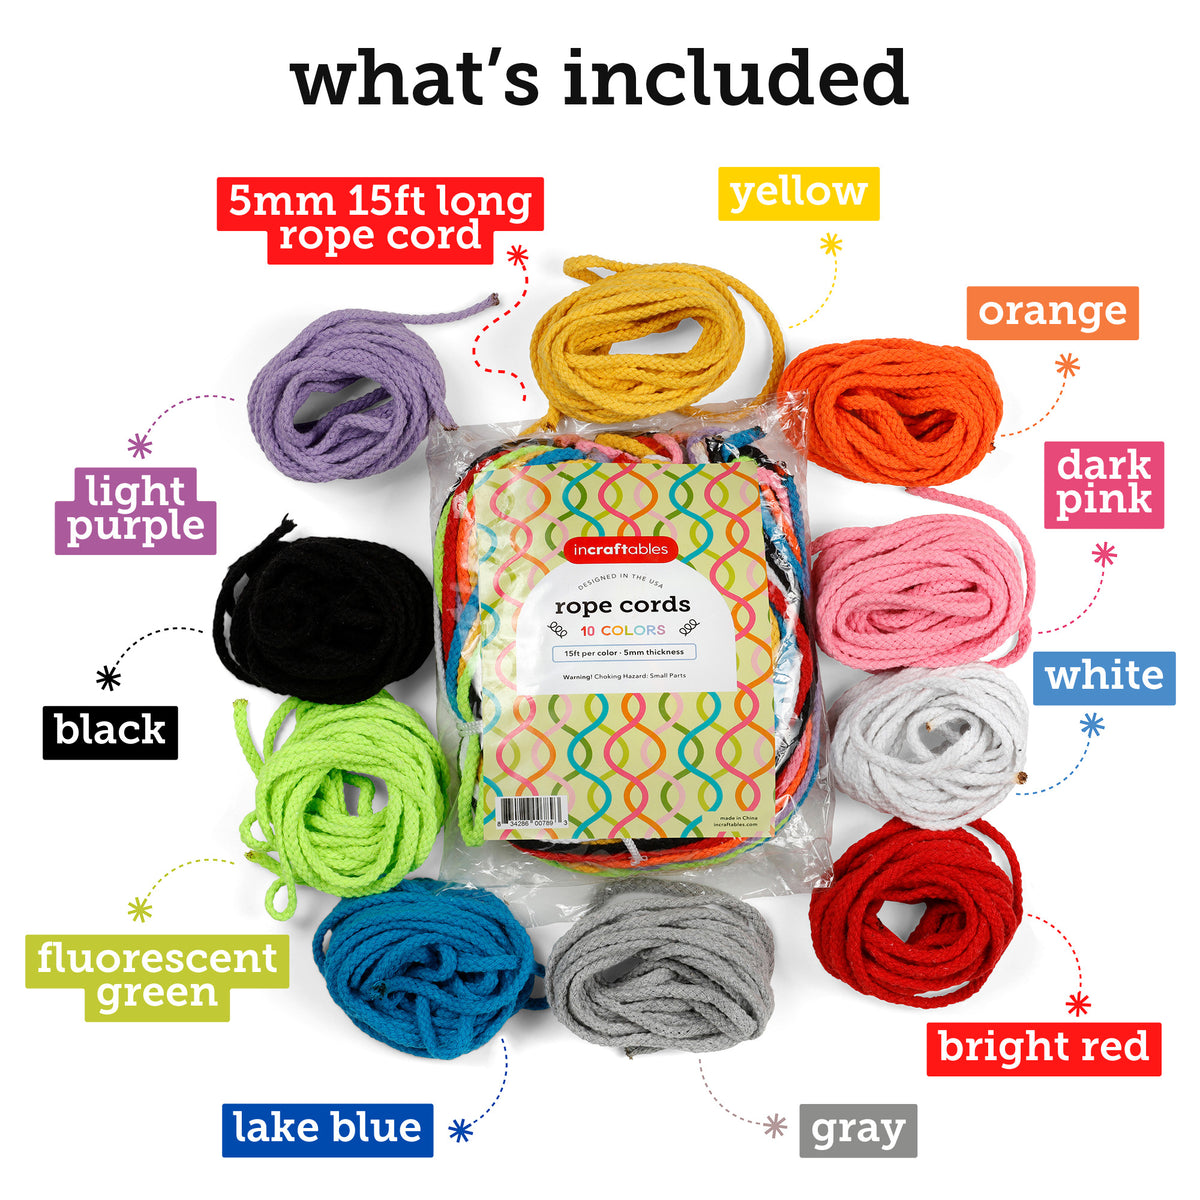 Incraftables Paracord Kit with 15 Colors Paracord Rope (2mm), Buckle,  Keyring, Carabiner & More 